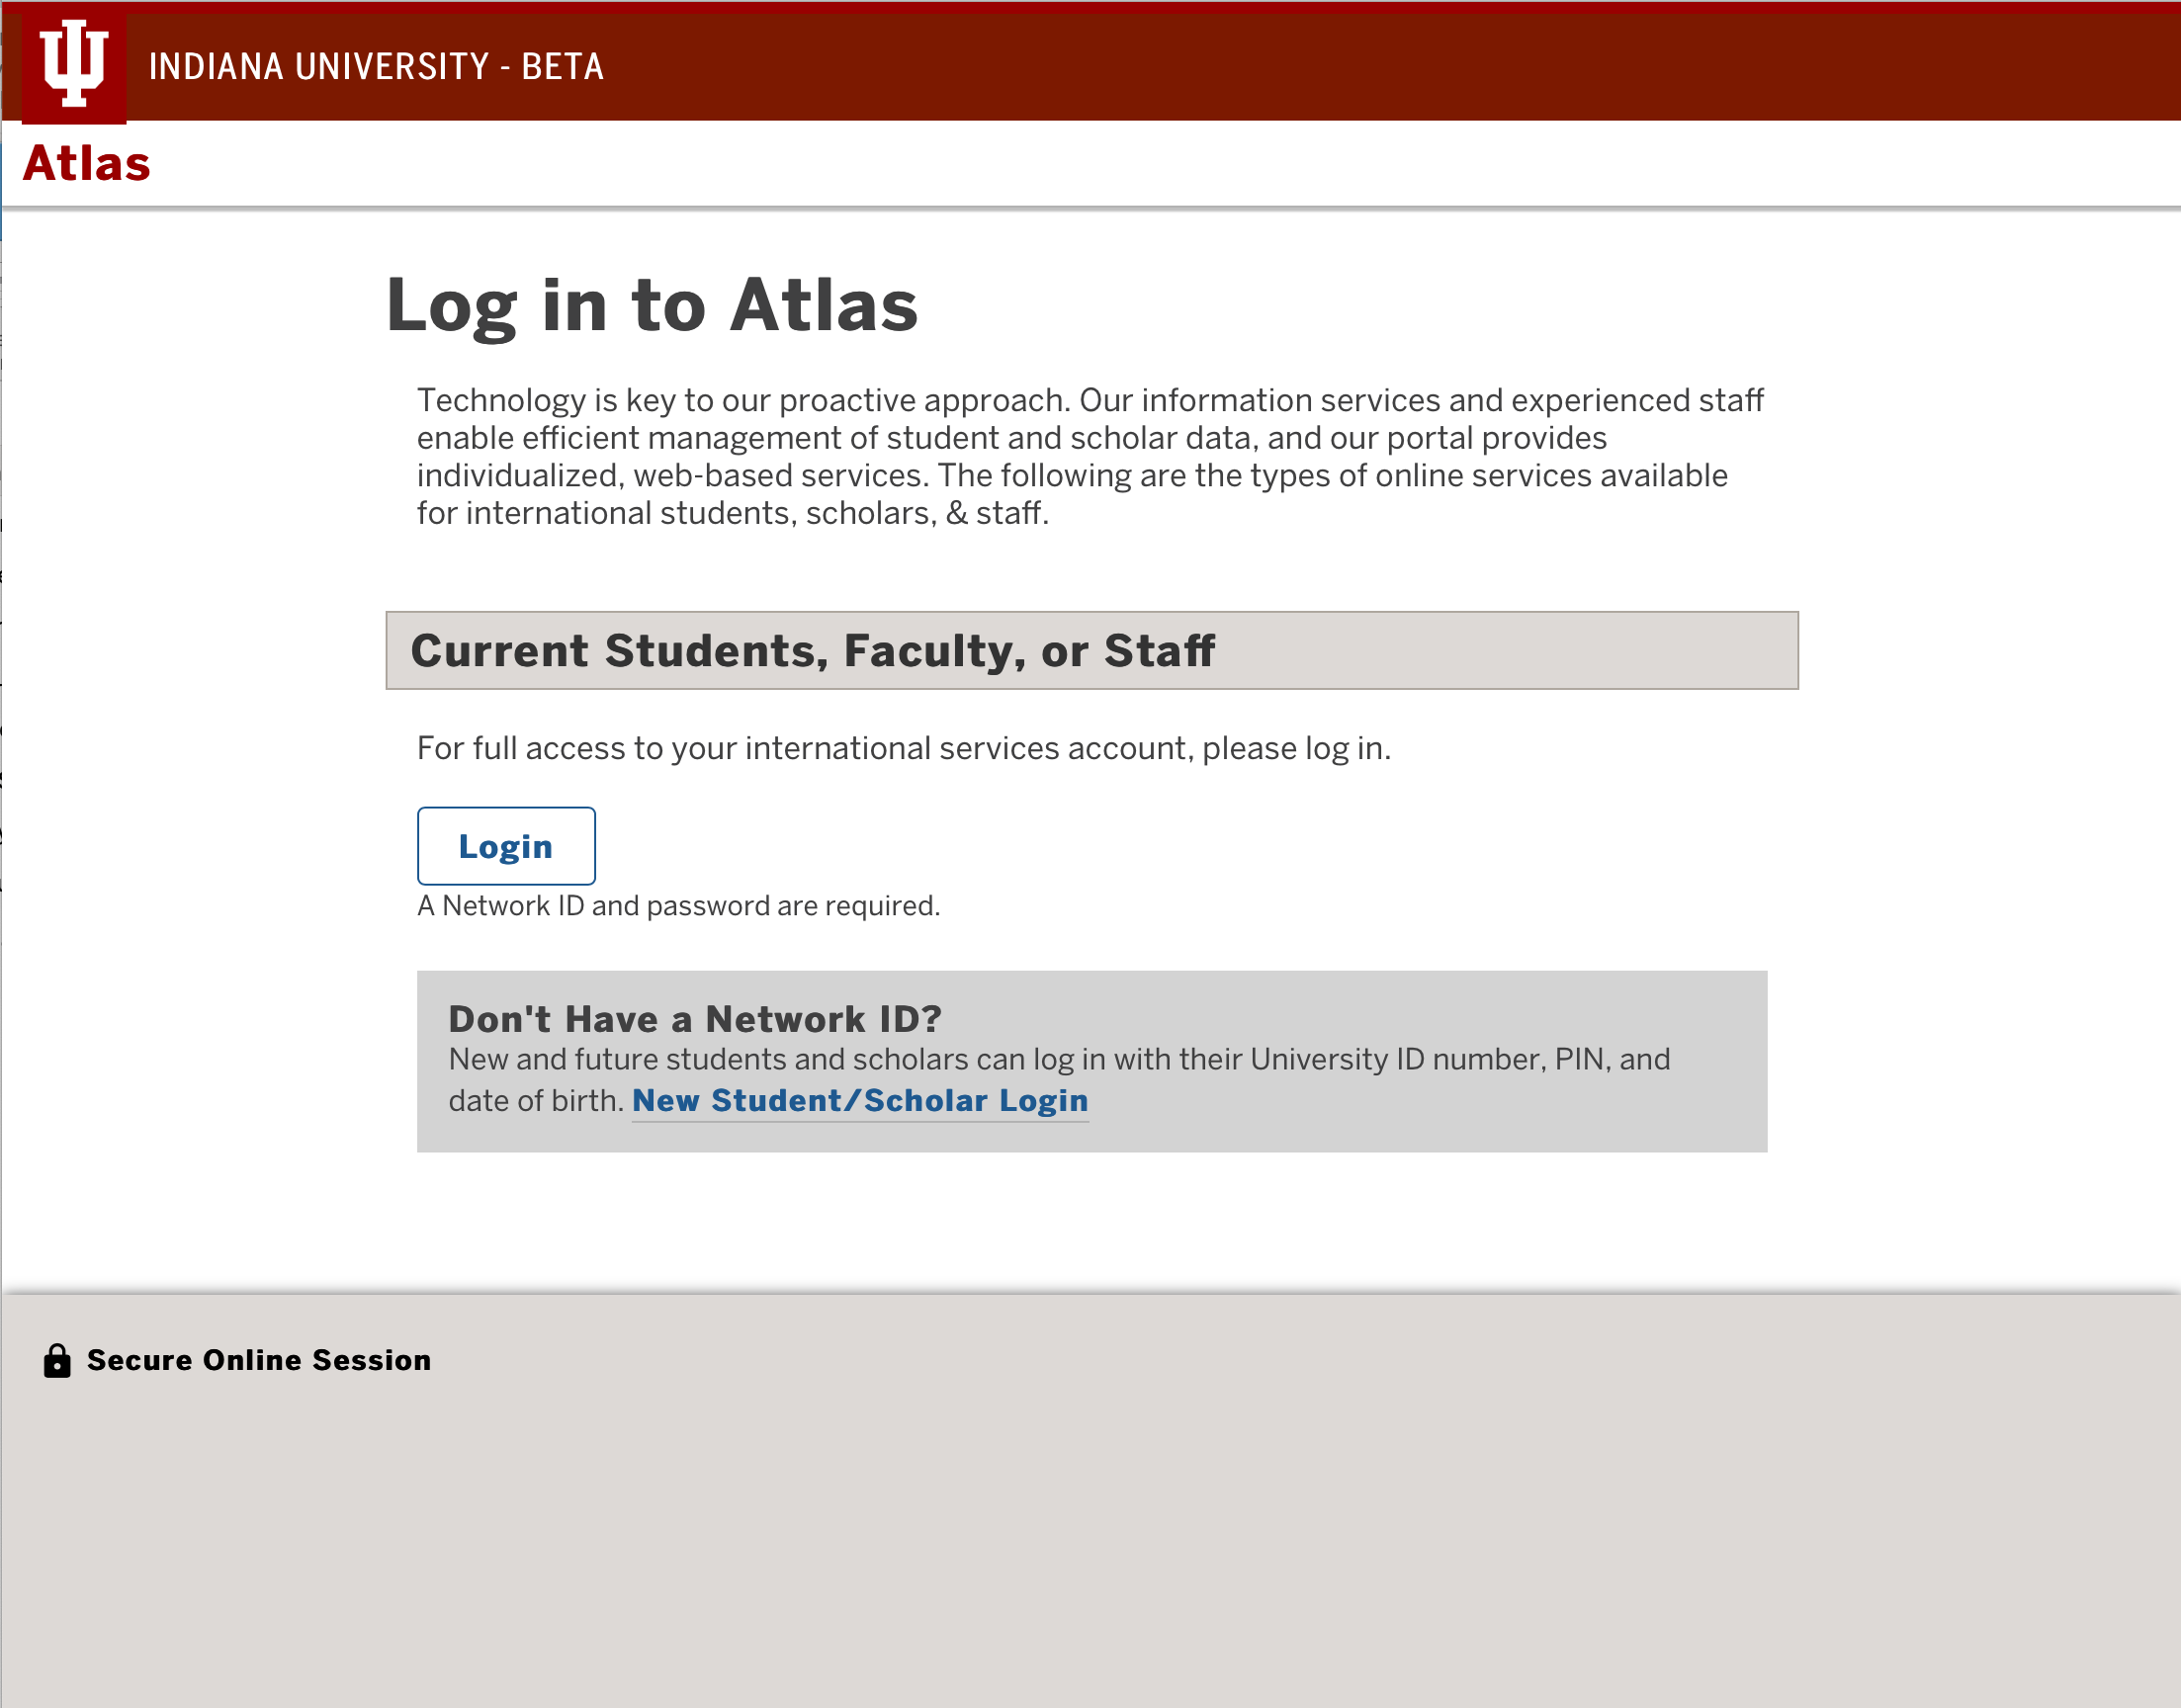 The login page in Atlas